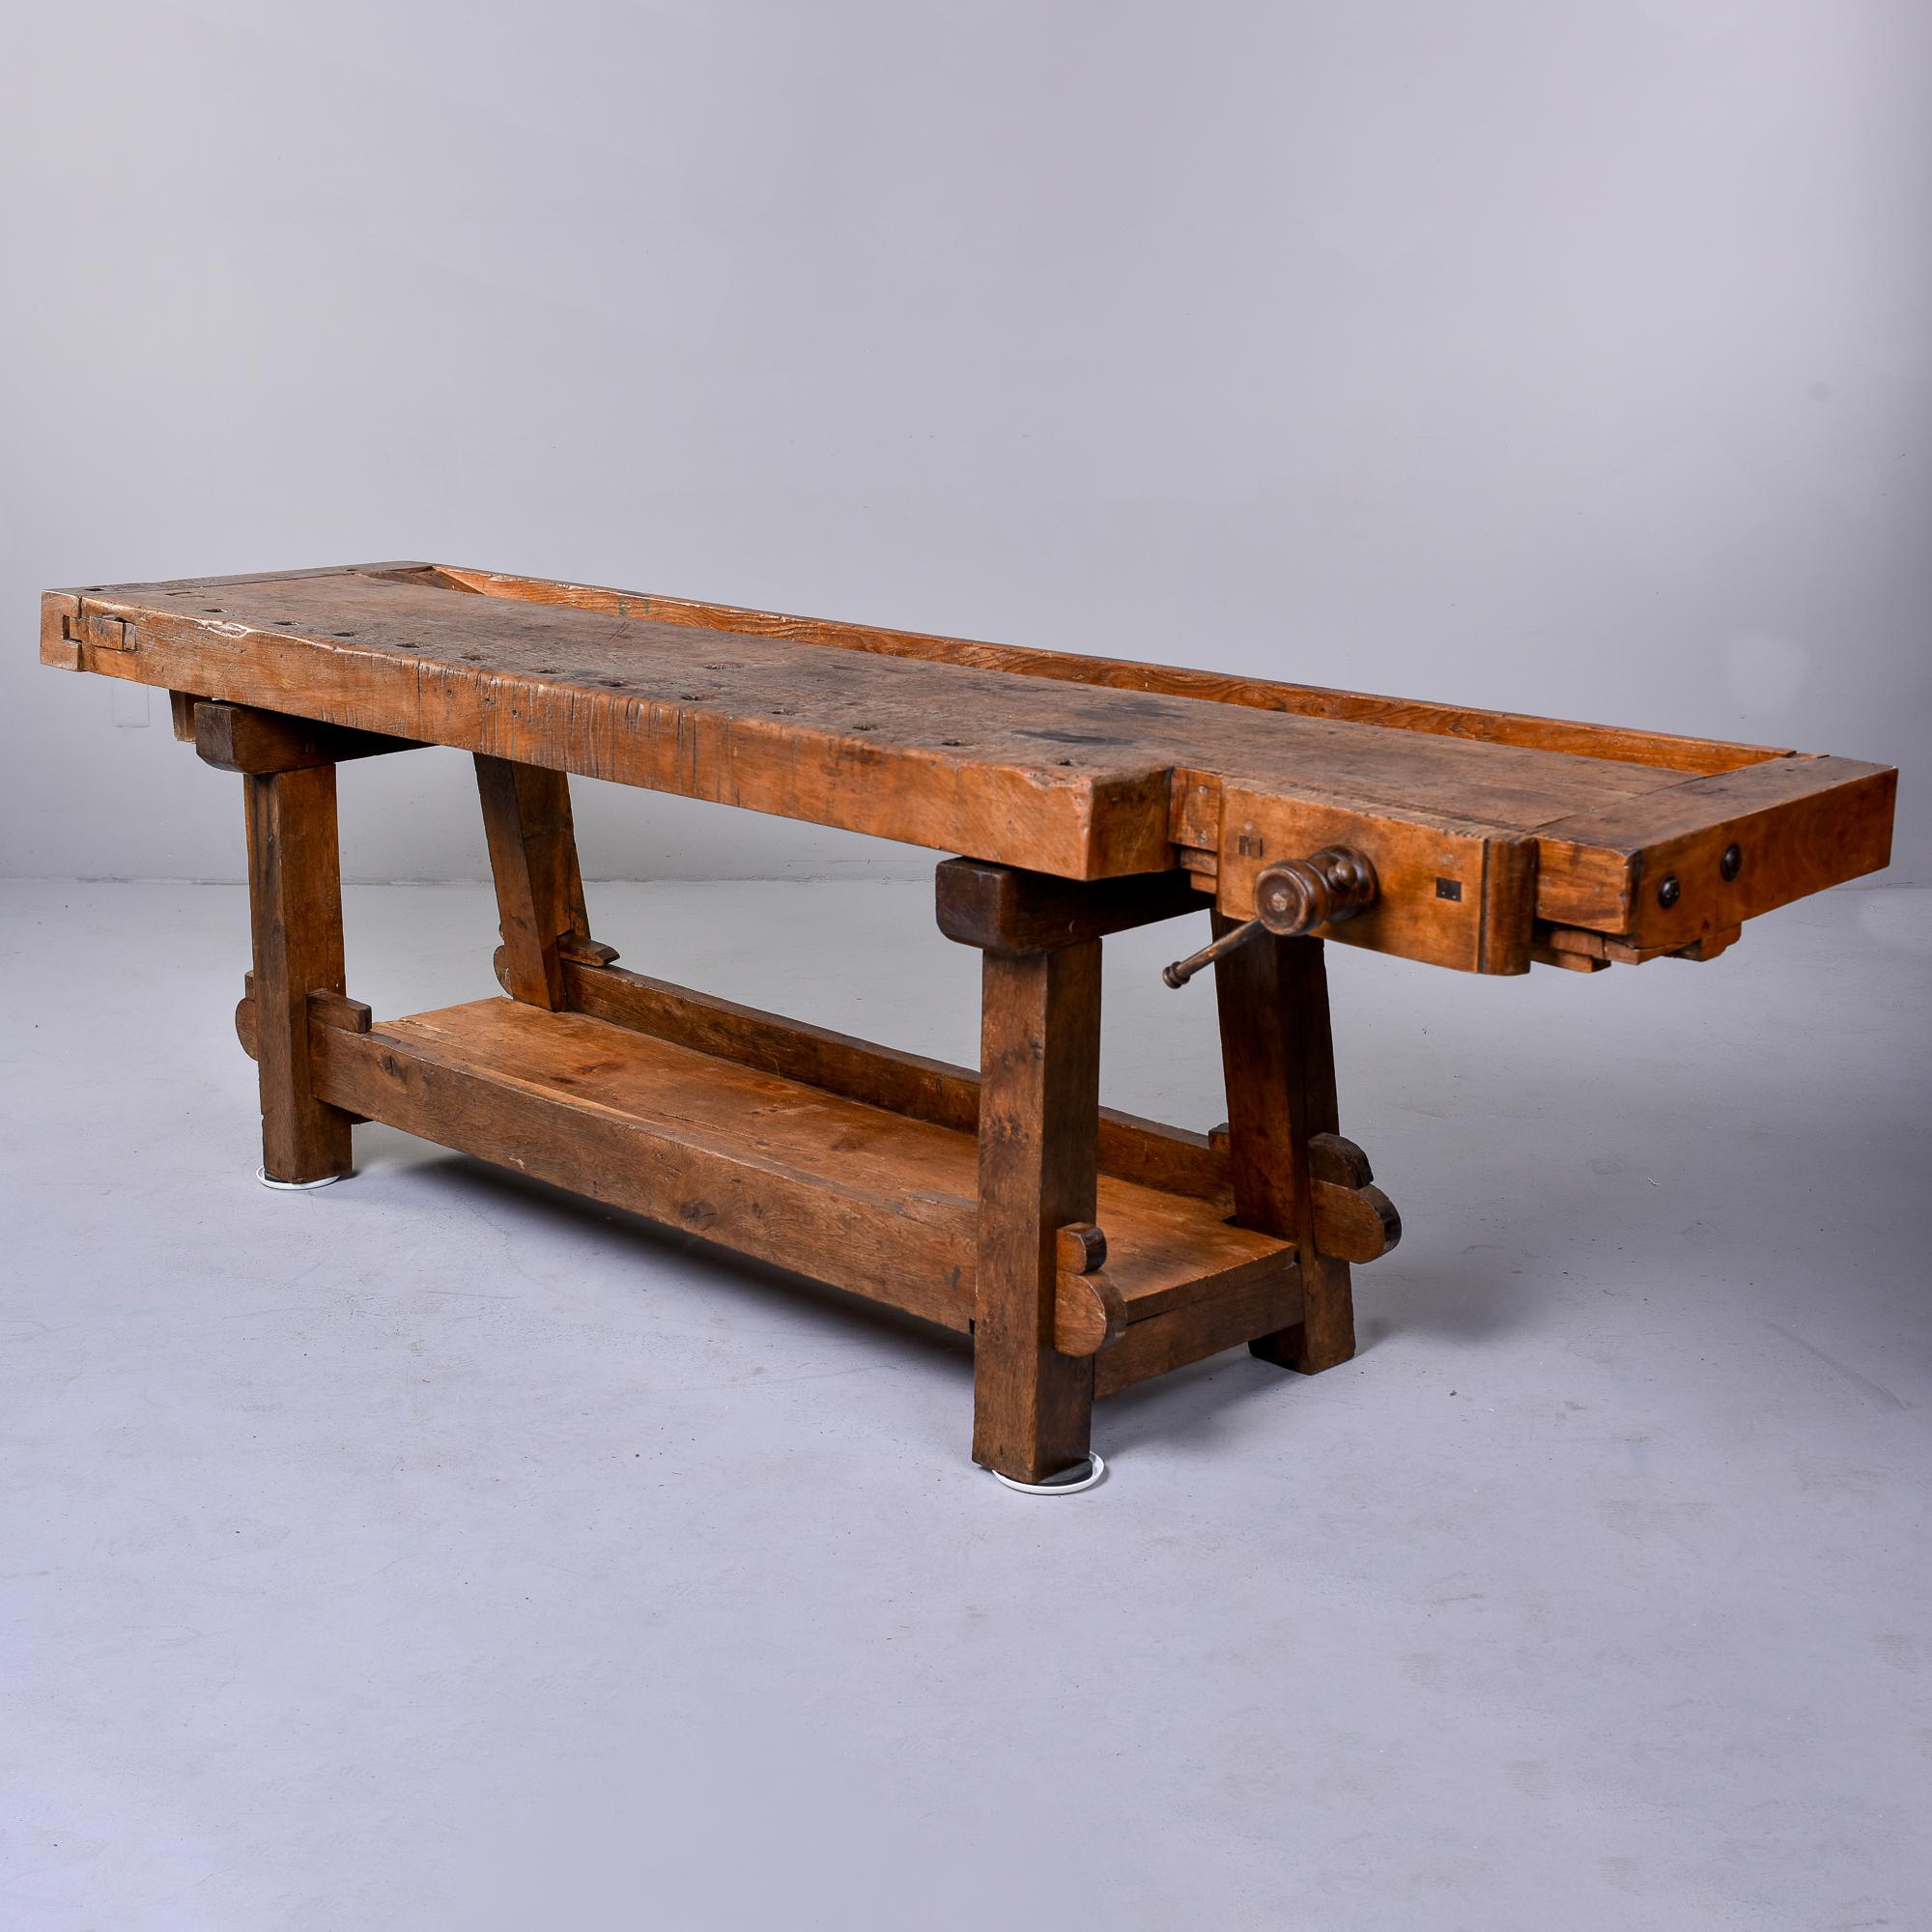 This circa 1880s work bench table is made of heavy oak and was found in England.  The clamp is still present, along with a work trough on the table top. Plenty of honest wear and patina to wood surfaces. Mortis and tenon construction at the base and